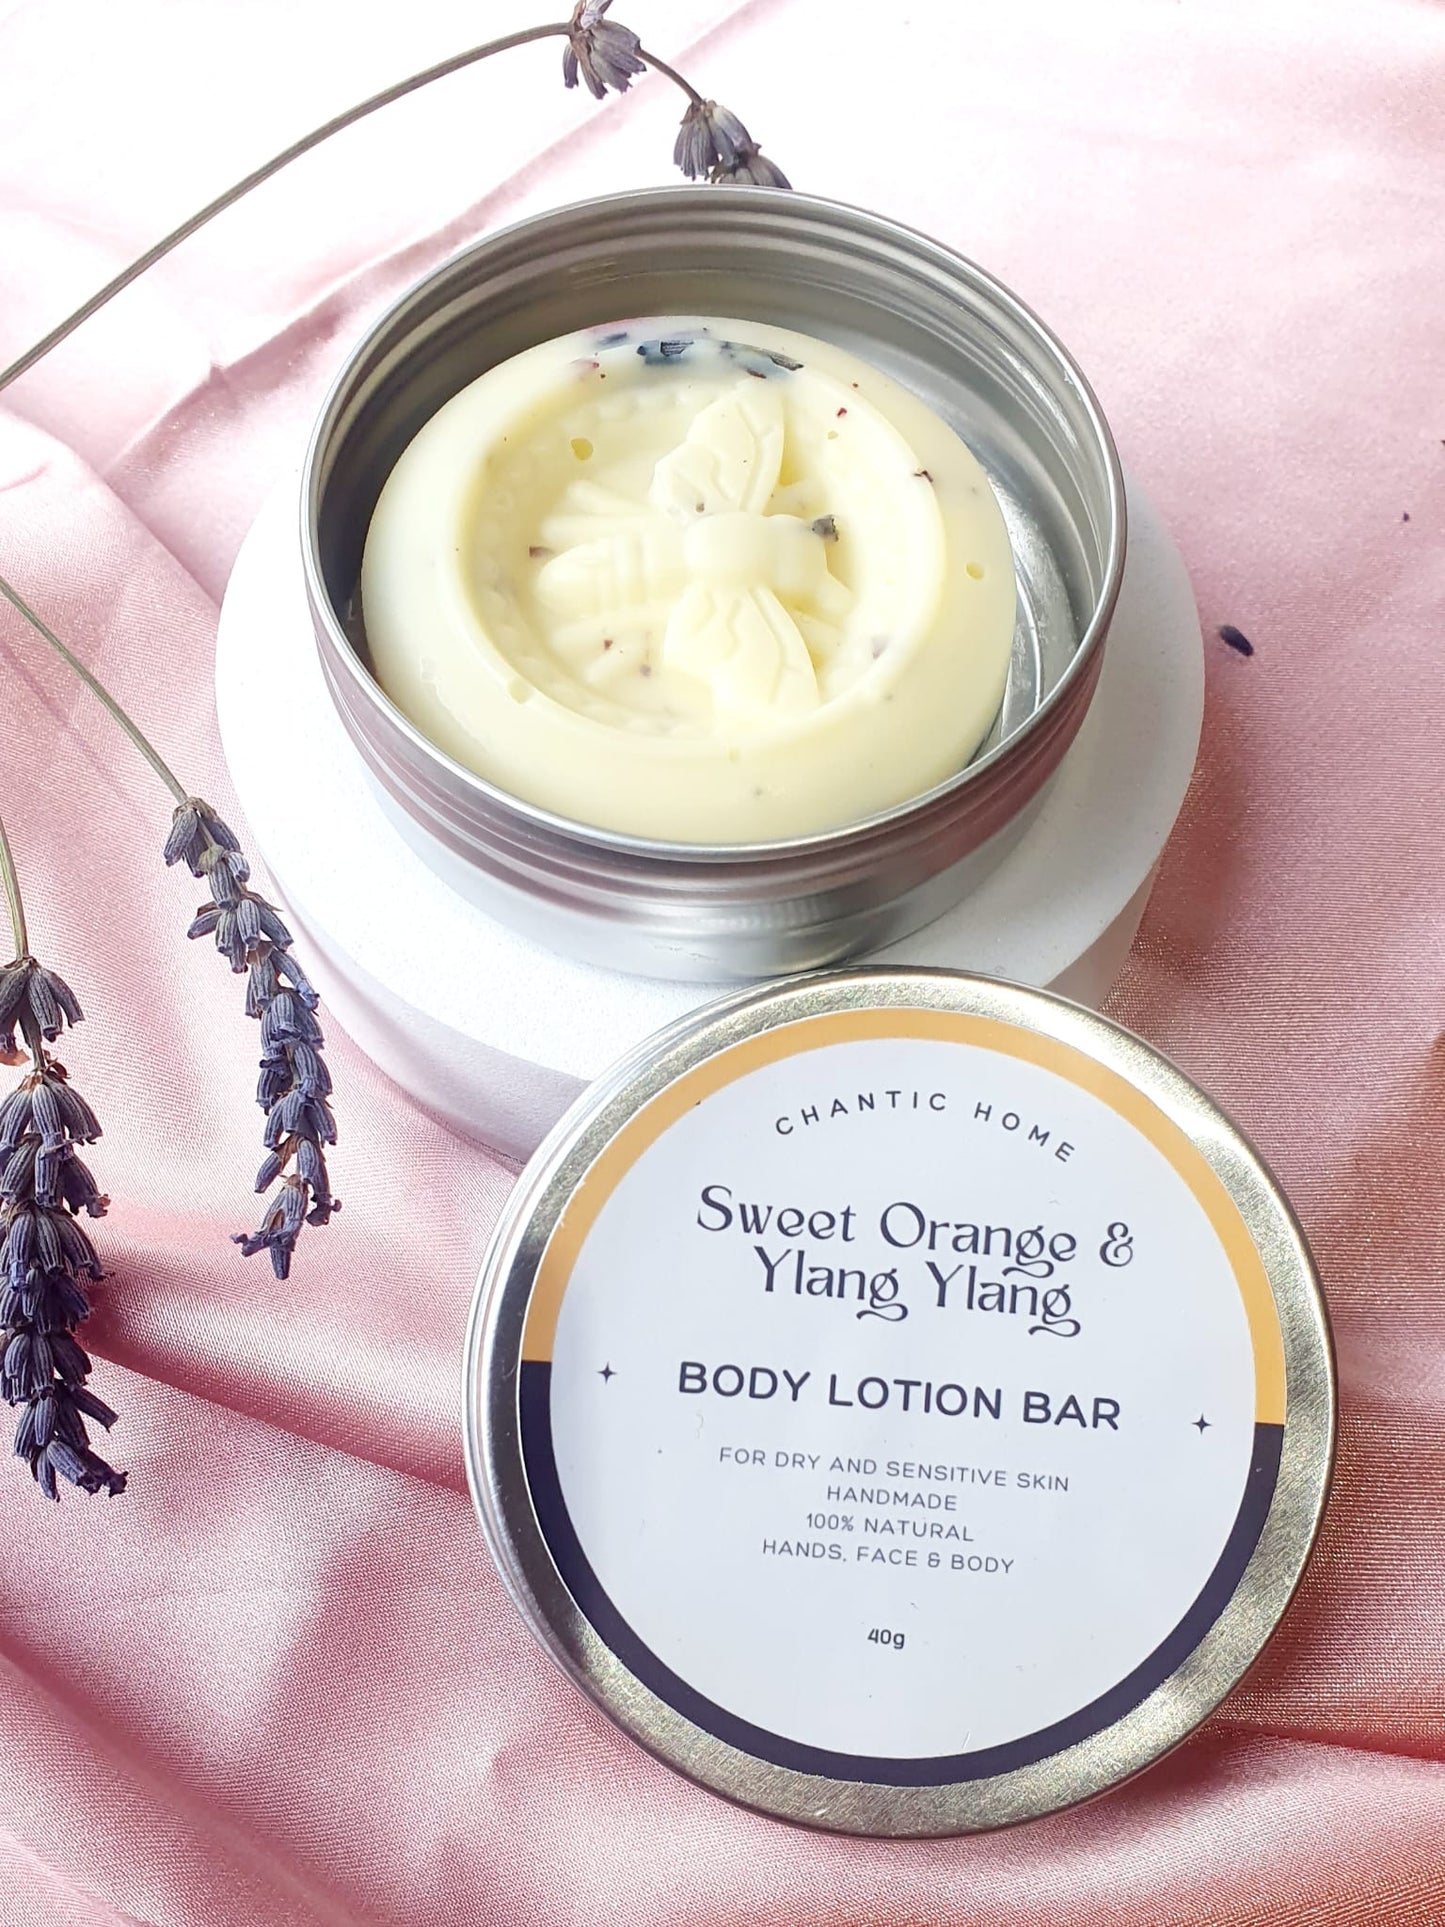 Scented Solid Body Lotion Bar, Cocoa Butter, Coconut Oil & Beeswax